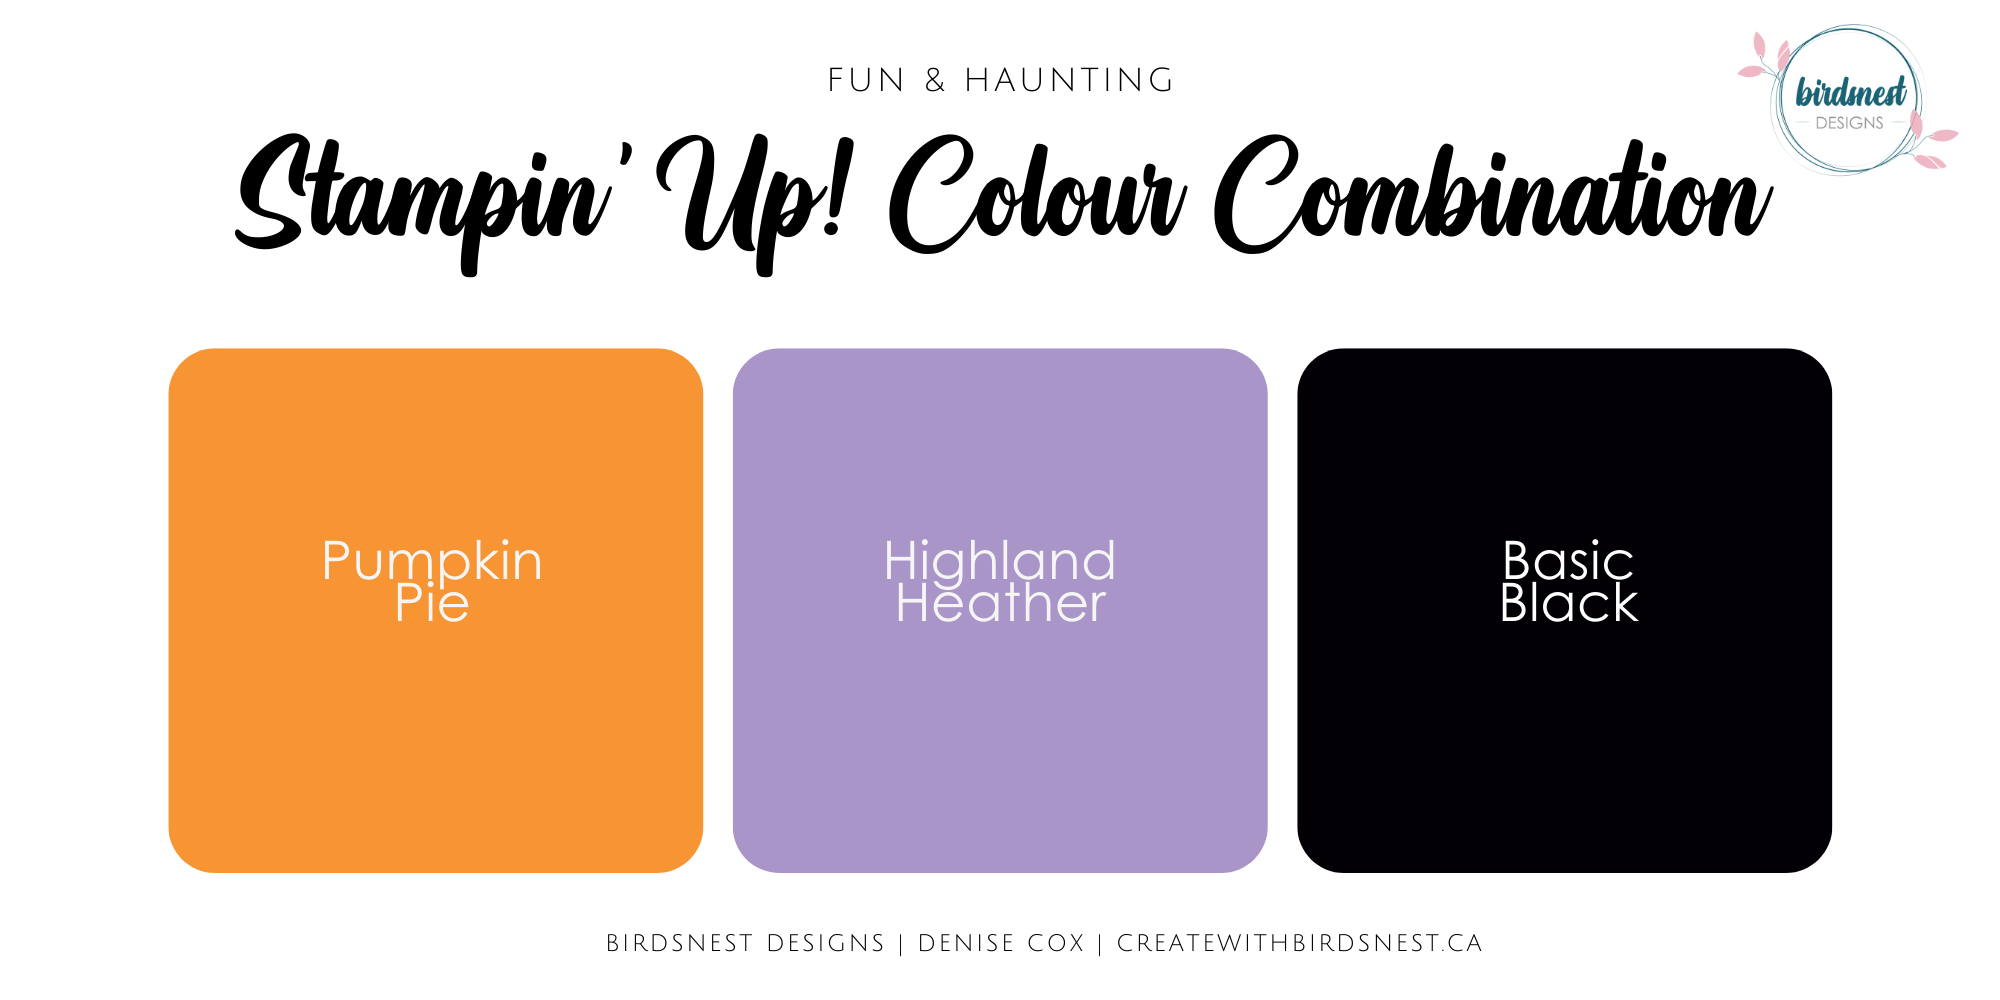 Stampin' Up! colours used on this Best Witches Halloween card are Pumpkin Pie, Highland Heather & Basic Black